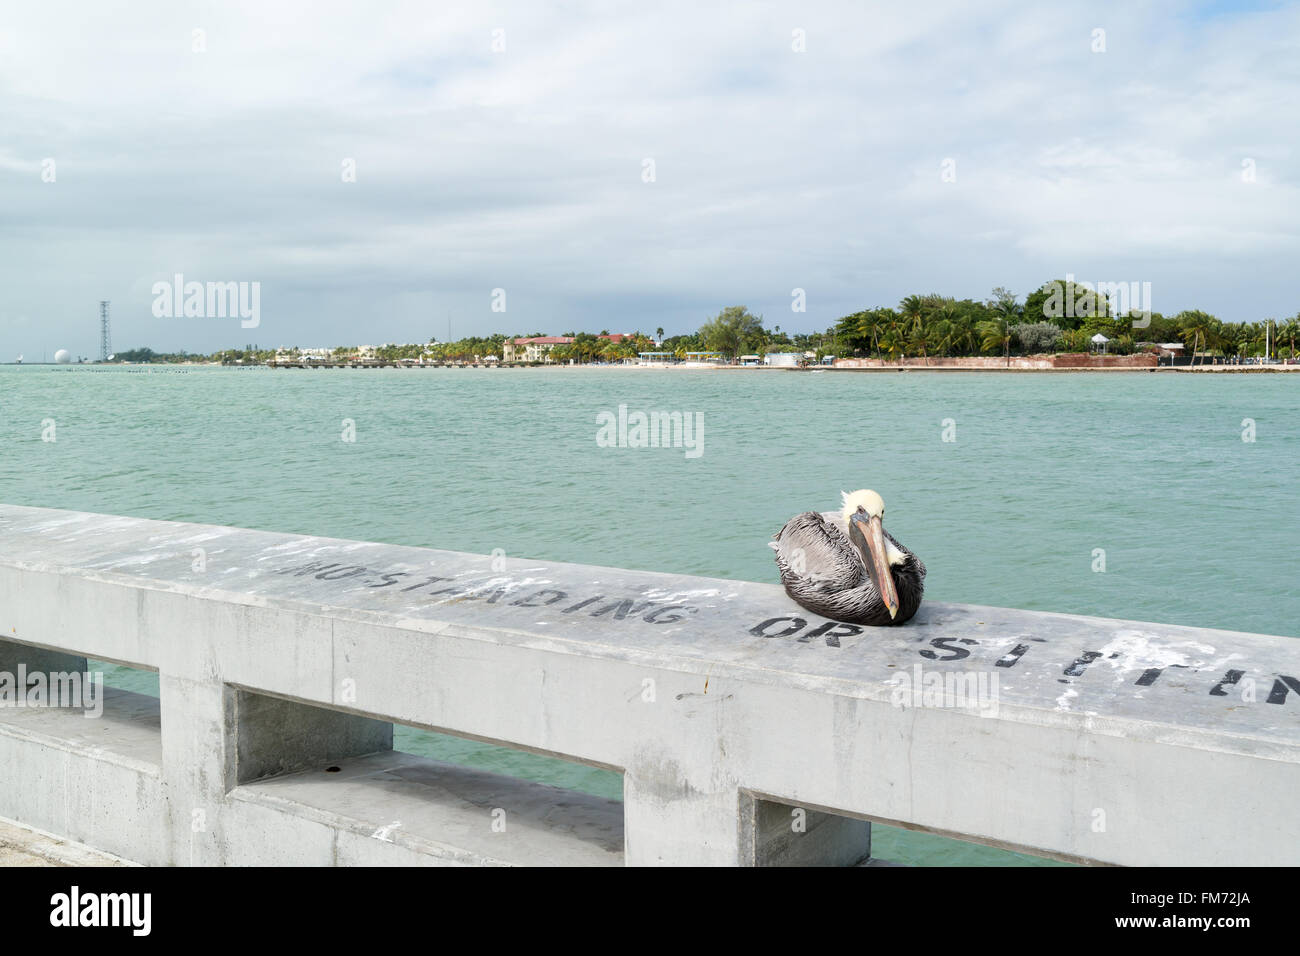 Brown pelican and south coast of Key West from White Street Fishing Pier, Florida Keys, USA Stock Photo